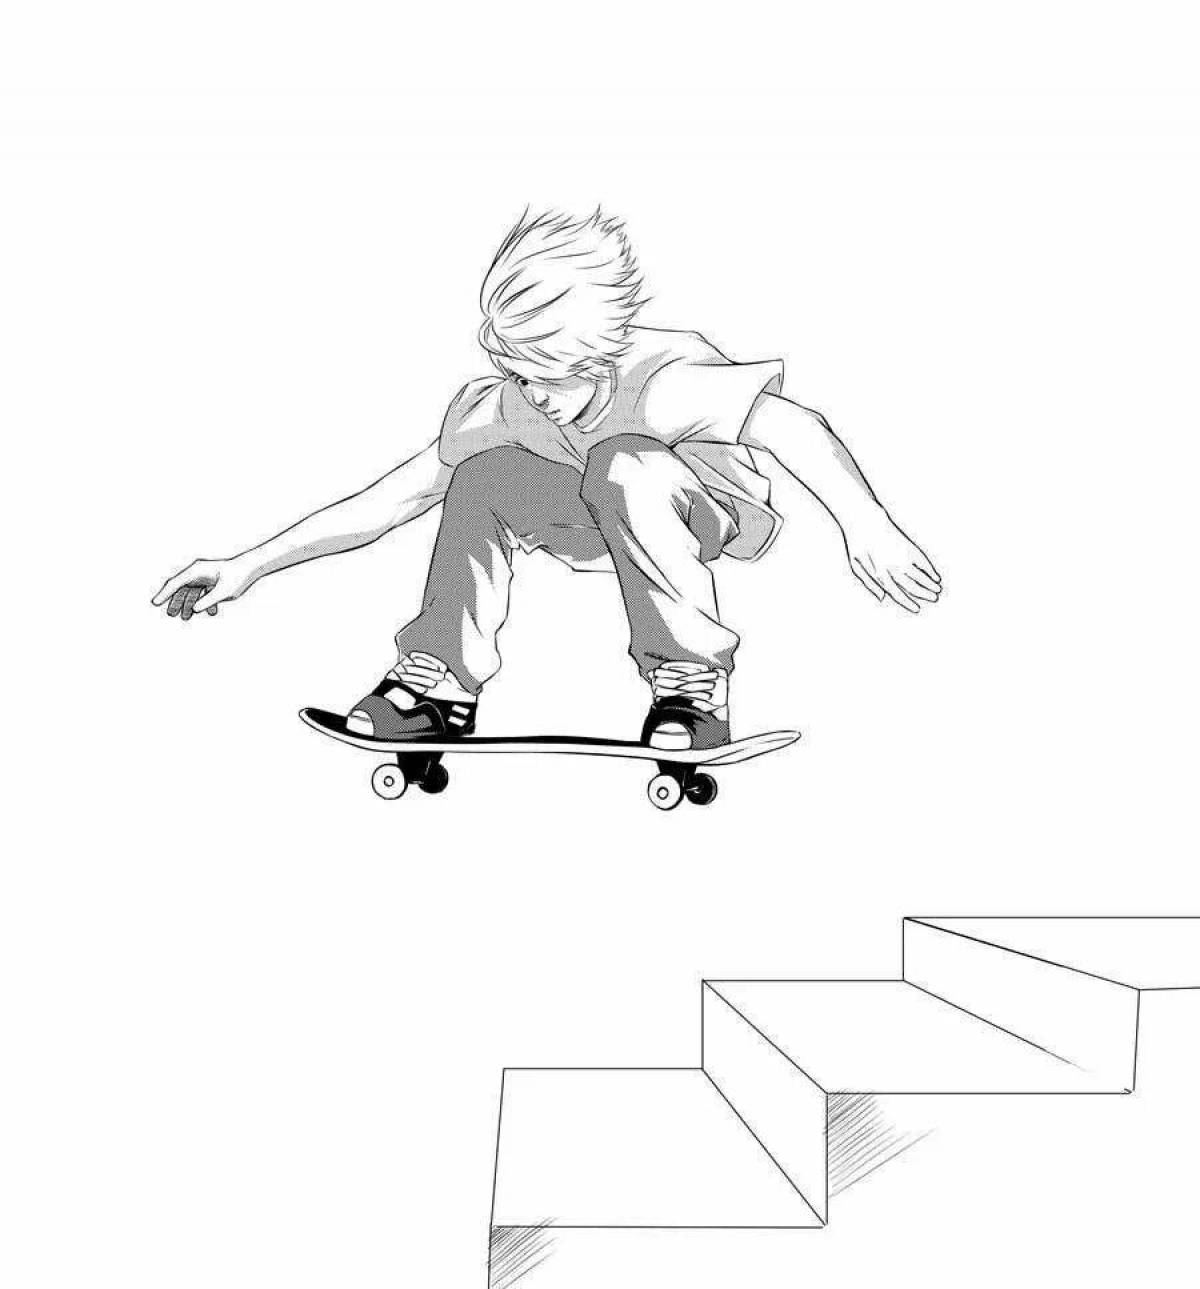 Skate infinity bright coloring page